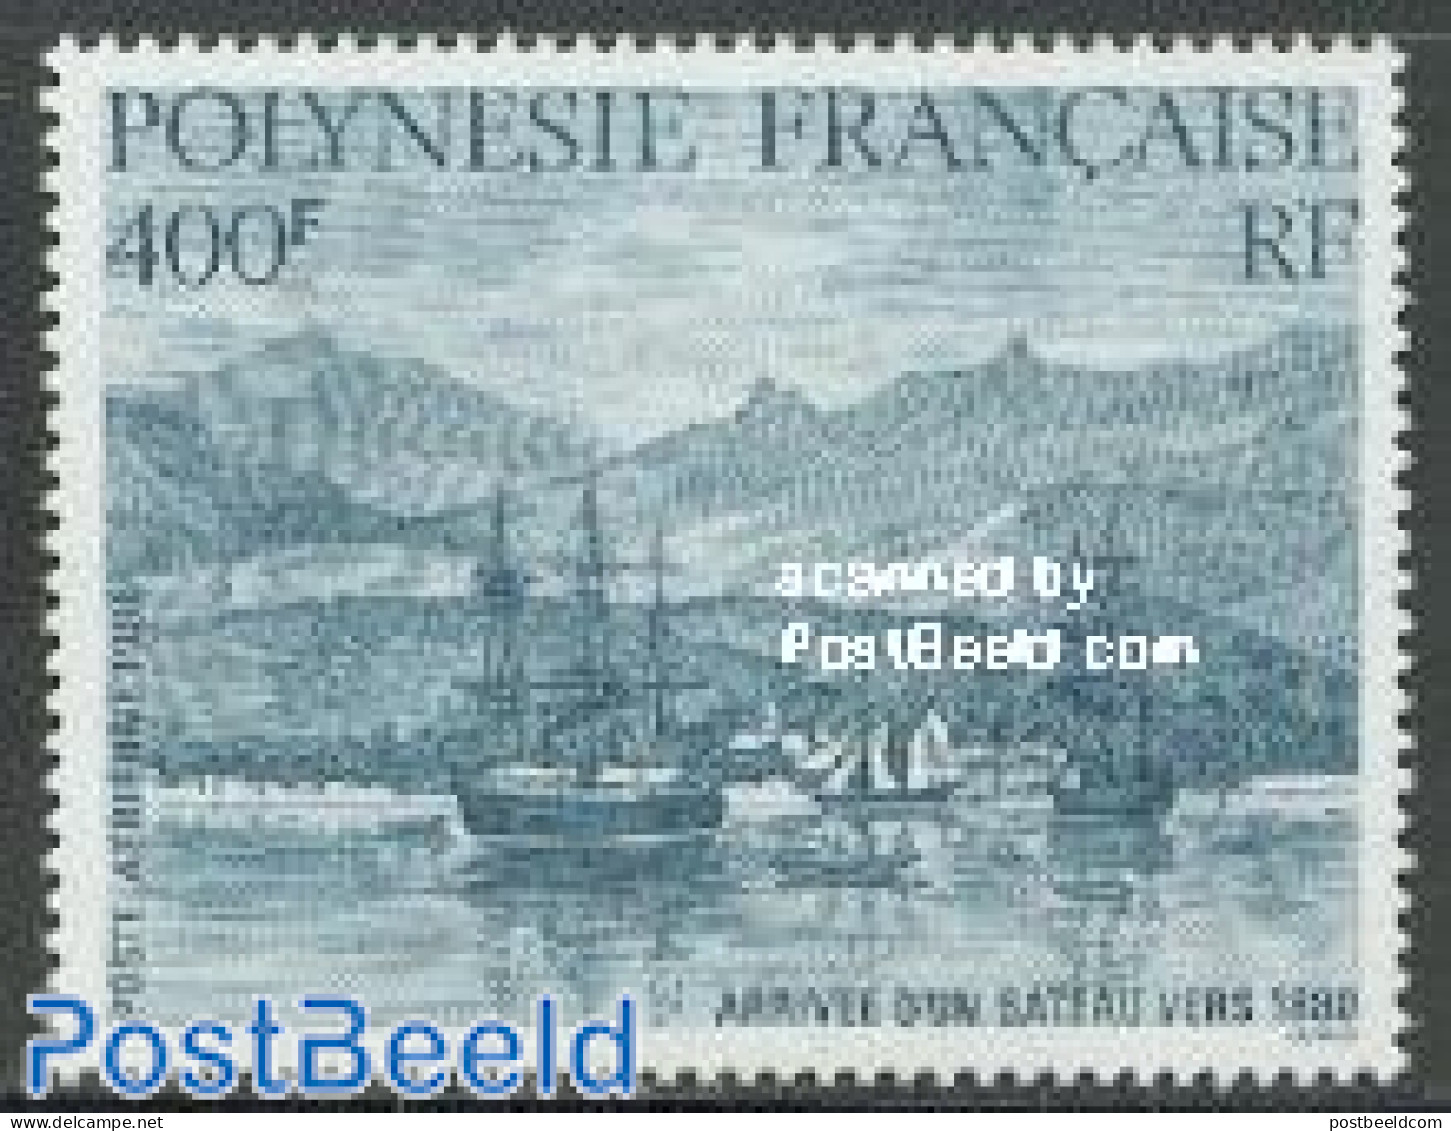 French Polynesia 1986 Ship Mail 1v, Mint NH, Transport - Post - Ships And Boats - Neufs